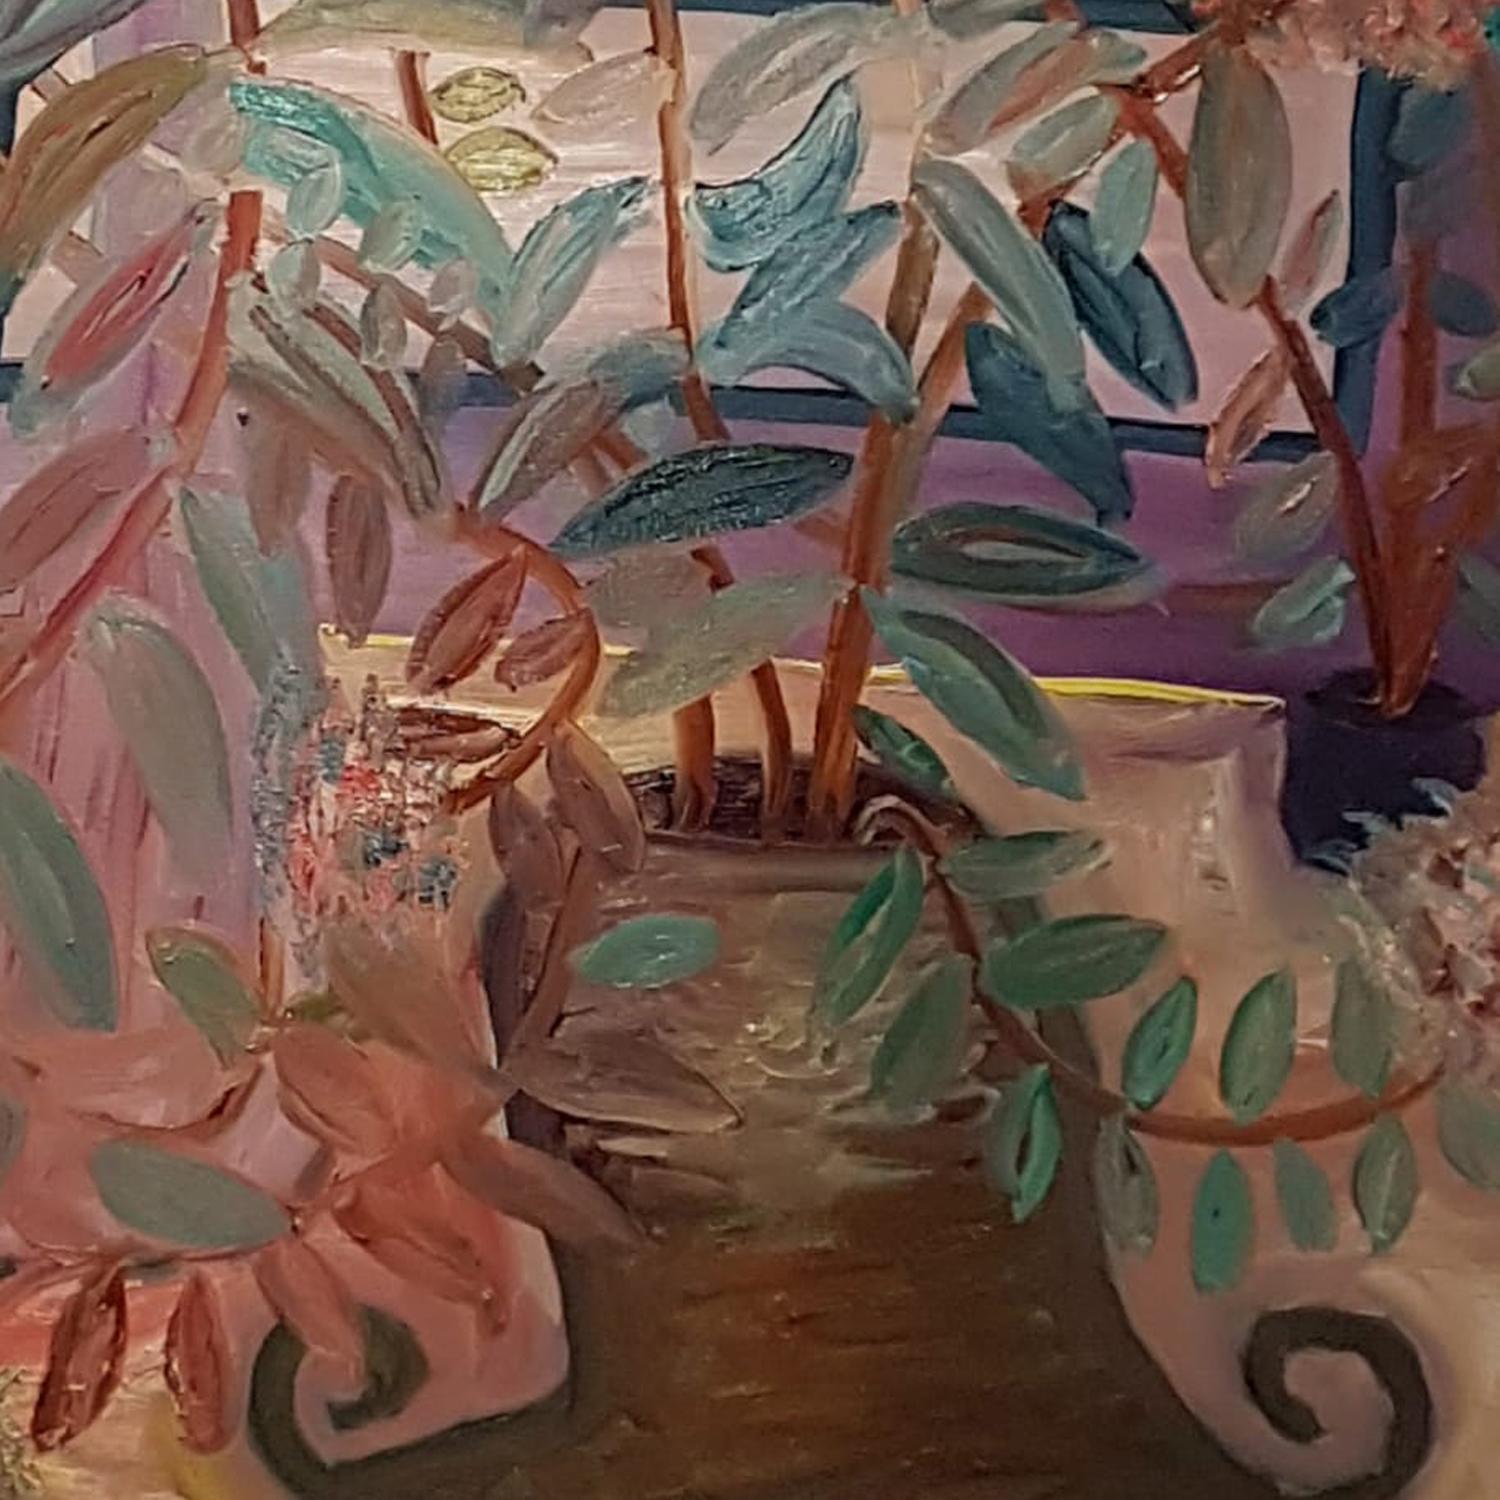 Dondi Schwartz
The bright side, 2021
oil on canvas
100x80 cm

As the viewer approaches this painting, we initially are greeted by the brown tones upon which the painting rests. From the planter sprout the dancing flowers and leaves, set on a pastel